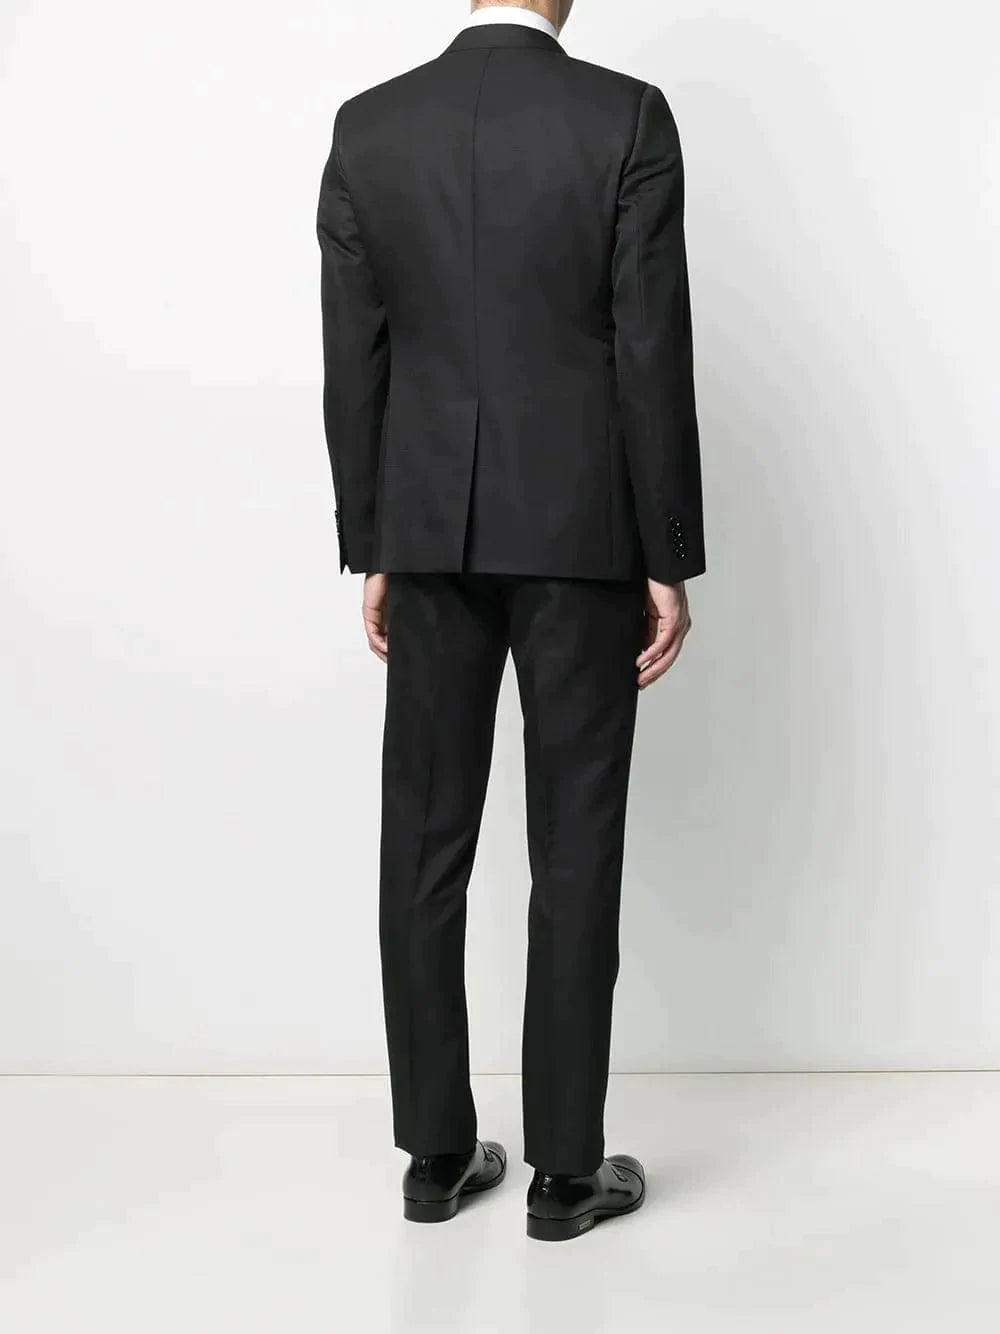 Dolce & Gabbana Single-Breasted Dinner Suit